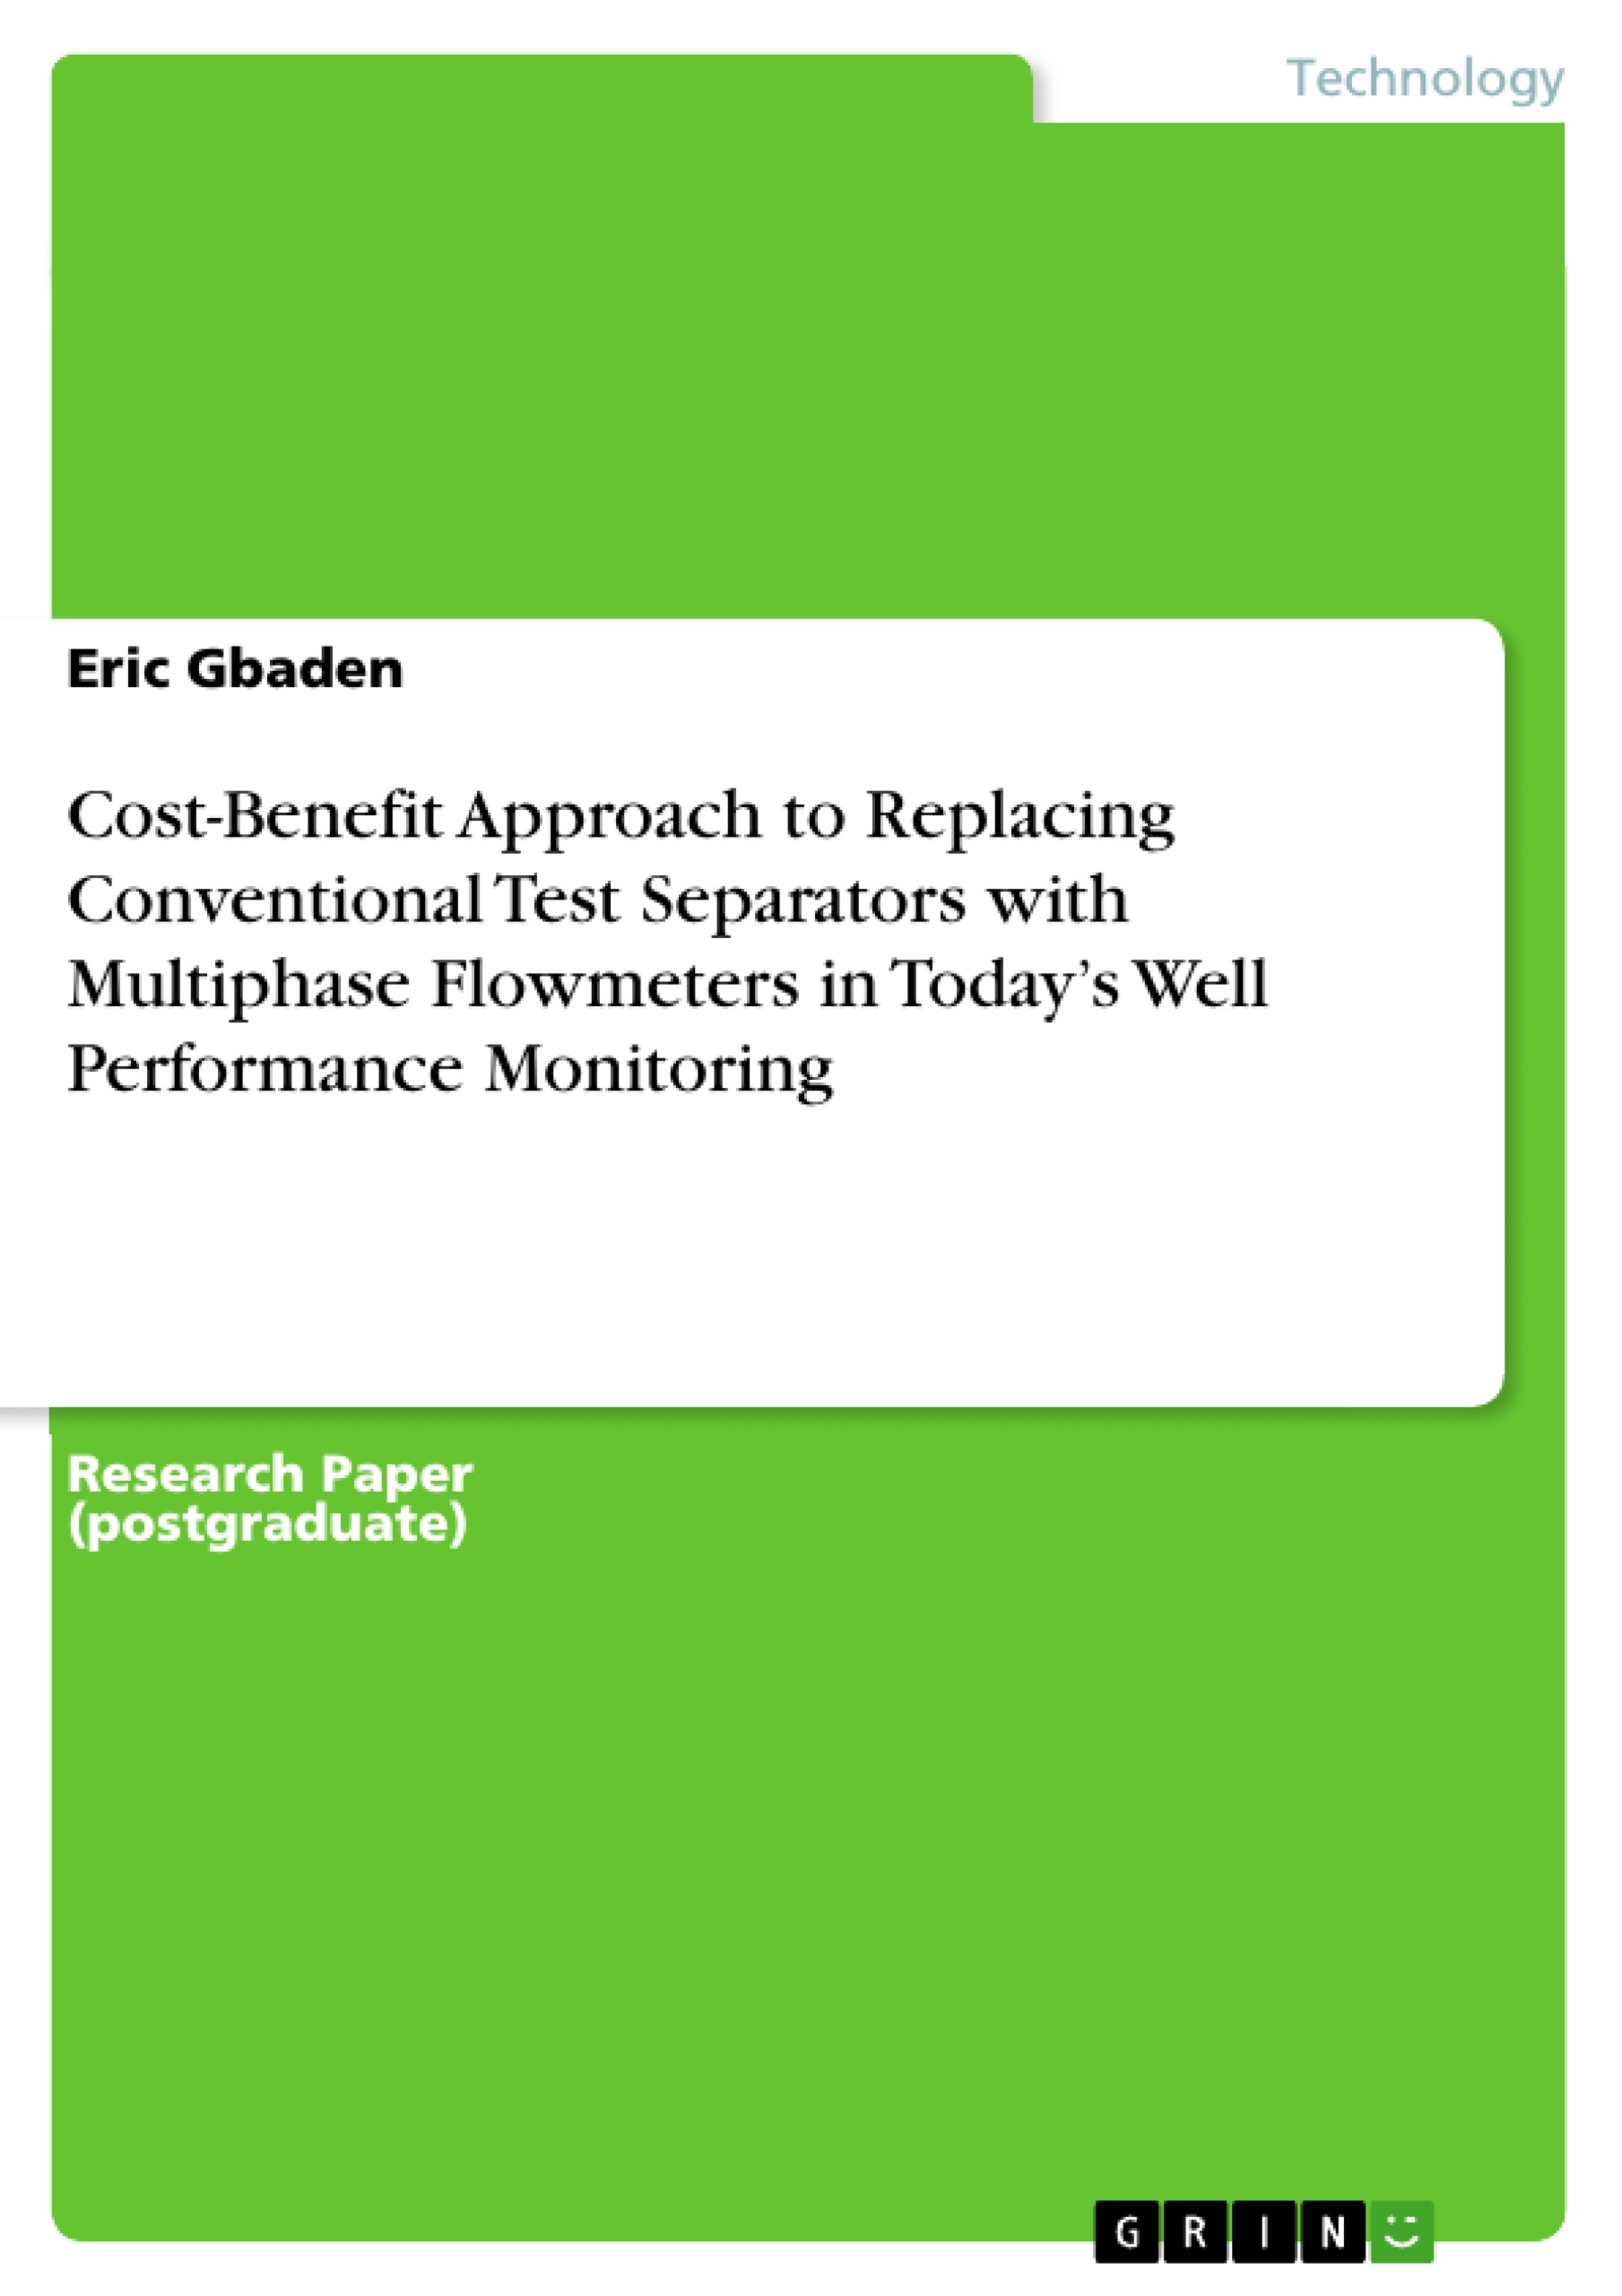 Titre: Cost-Benefit Approach to Replacing Conventional Test Separators with Multiphase Flowmeters in Today’s Well Performance Monitoring